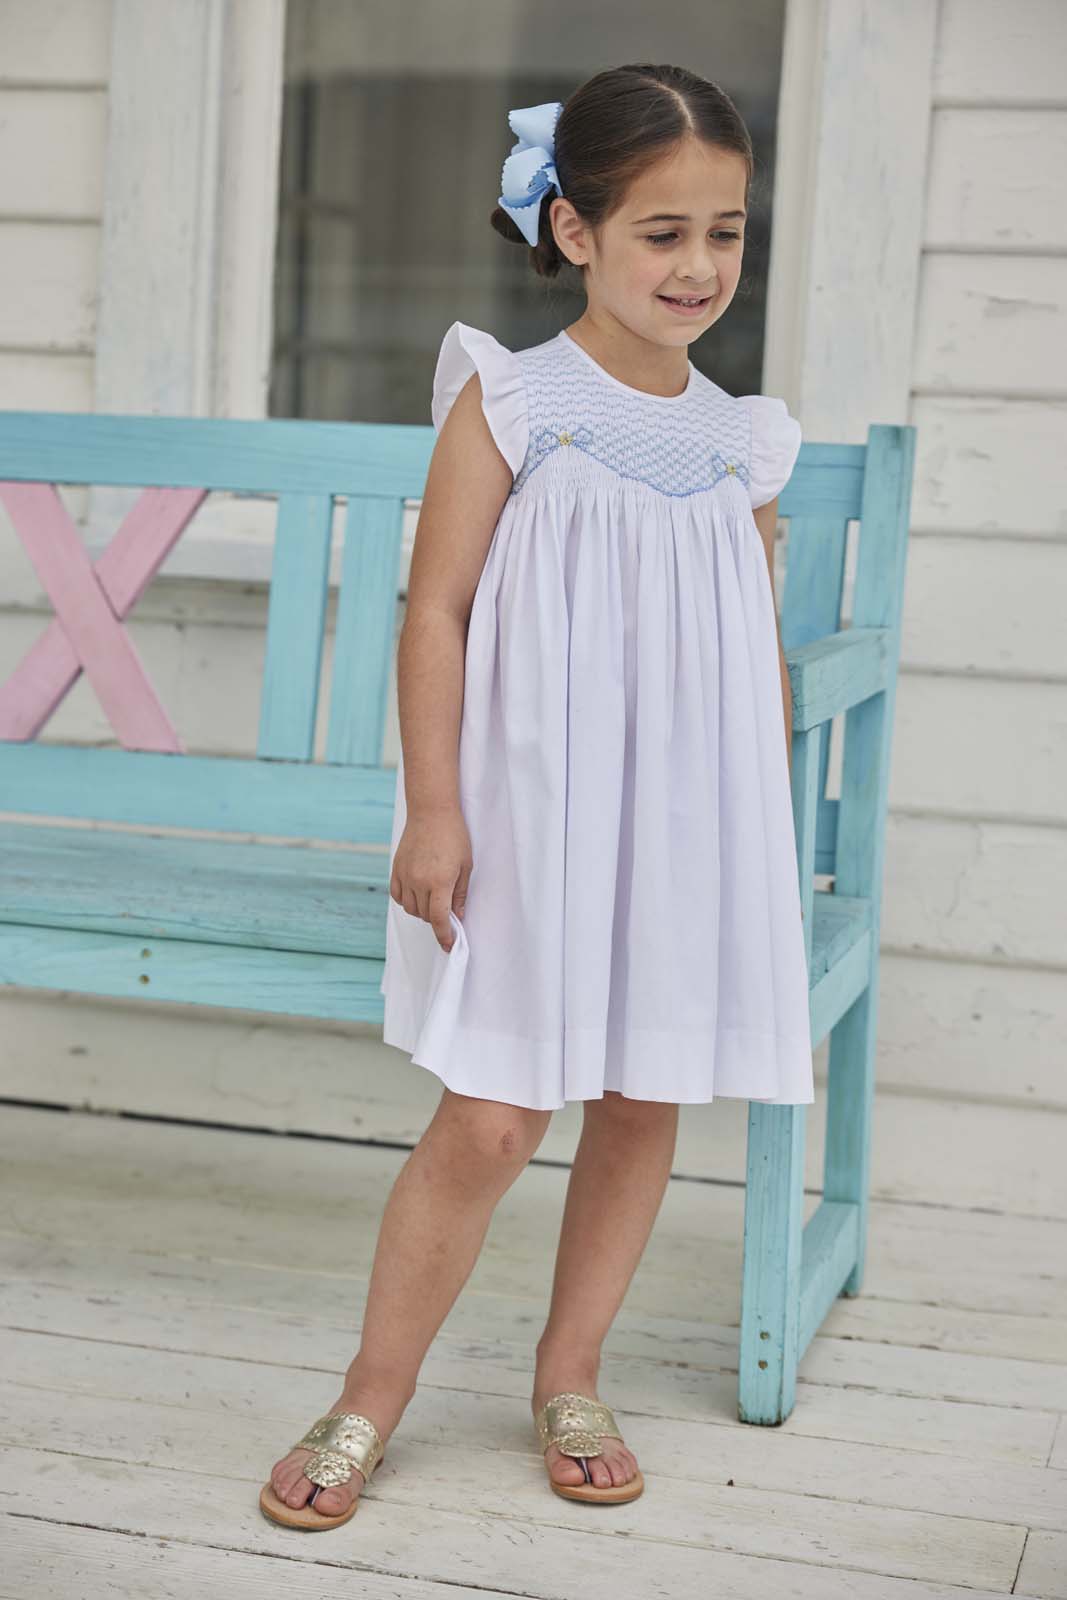 classic childrens clothing girls white dress with ruffle sleeves and blue smocking